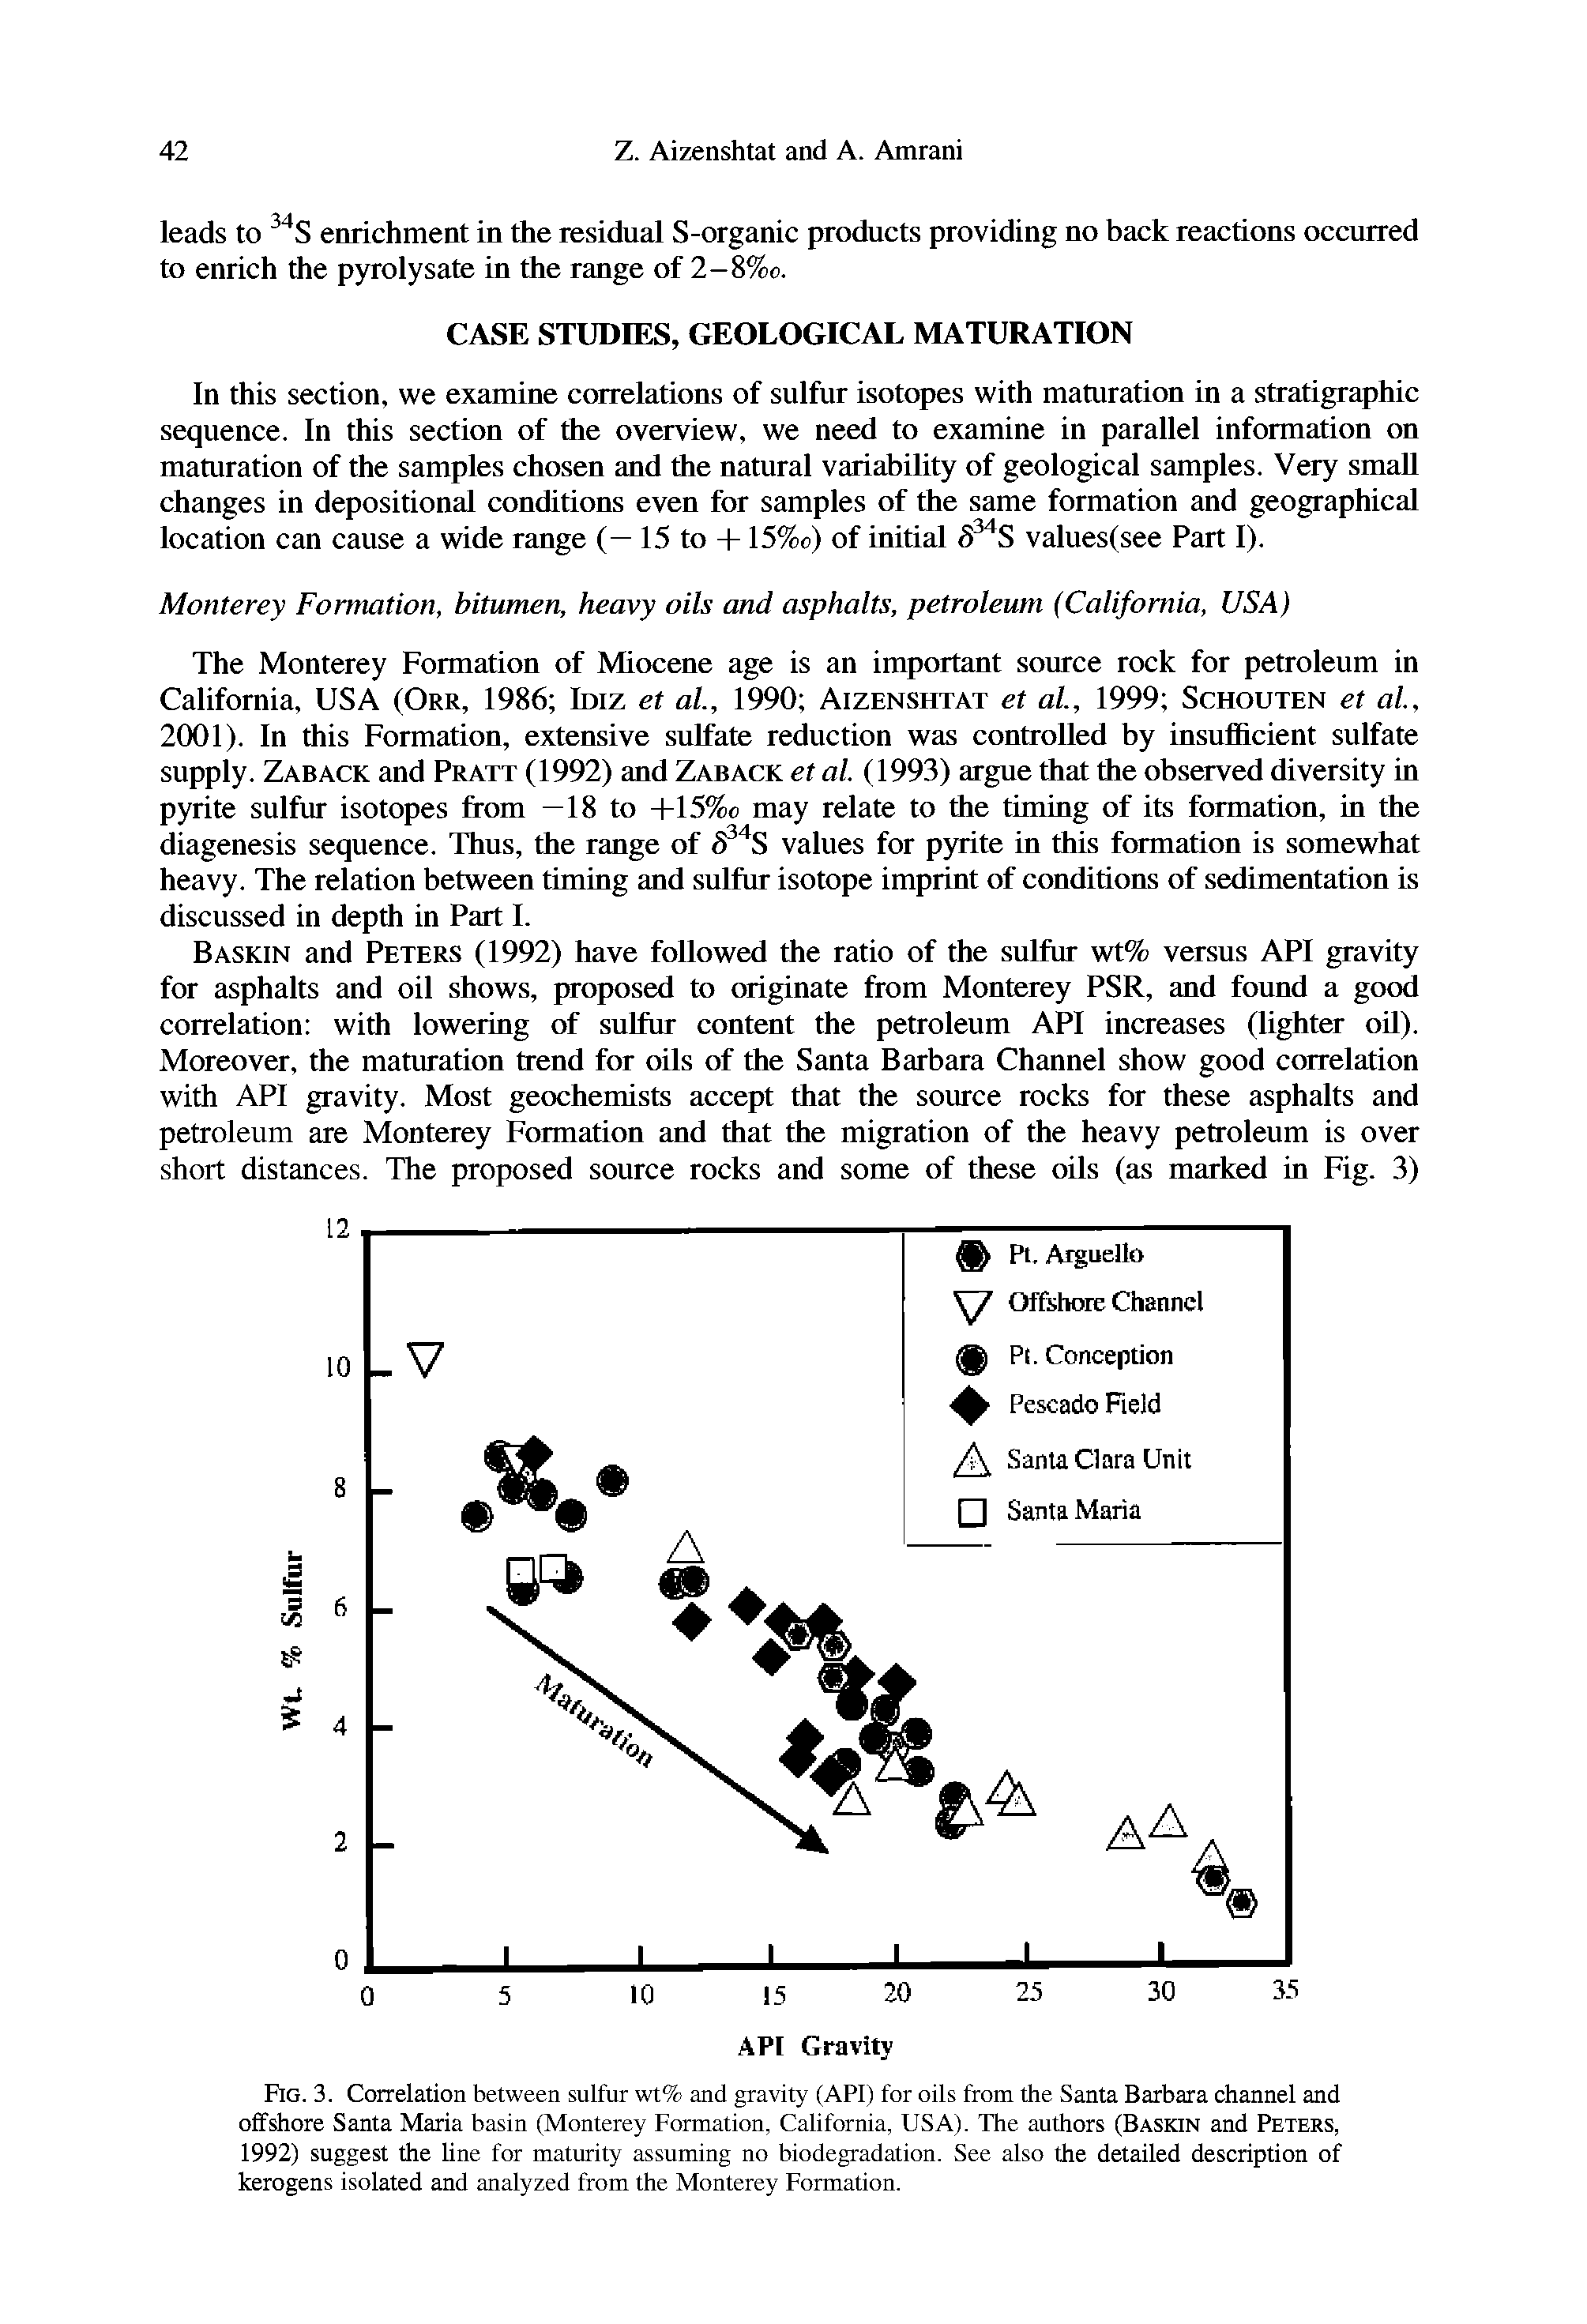 Fig. 3. Correlation between sulfur wt% and gravity (API) for oils from the Santa Barbara channel and offshore Santa Maria basin (Monterey Formation, California, USA). The authors (Baskin and Peters, 1992) suggest the line for maturity assuming no biodegradation. See also the detailed description of keiogens isolated and analyzed from the Monterey Formation.